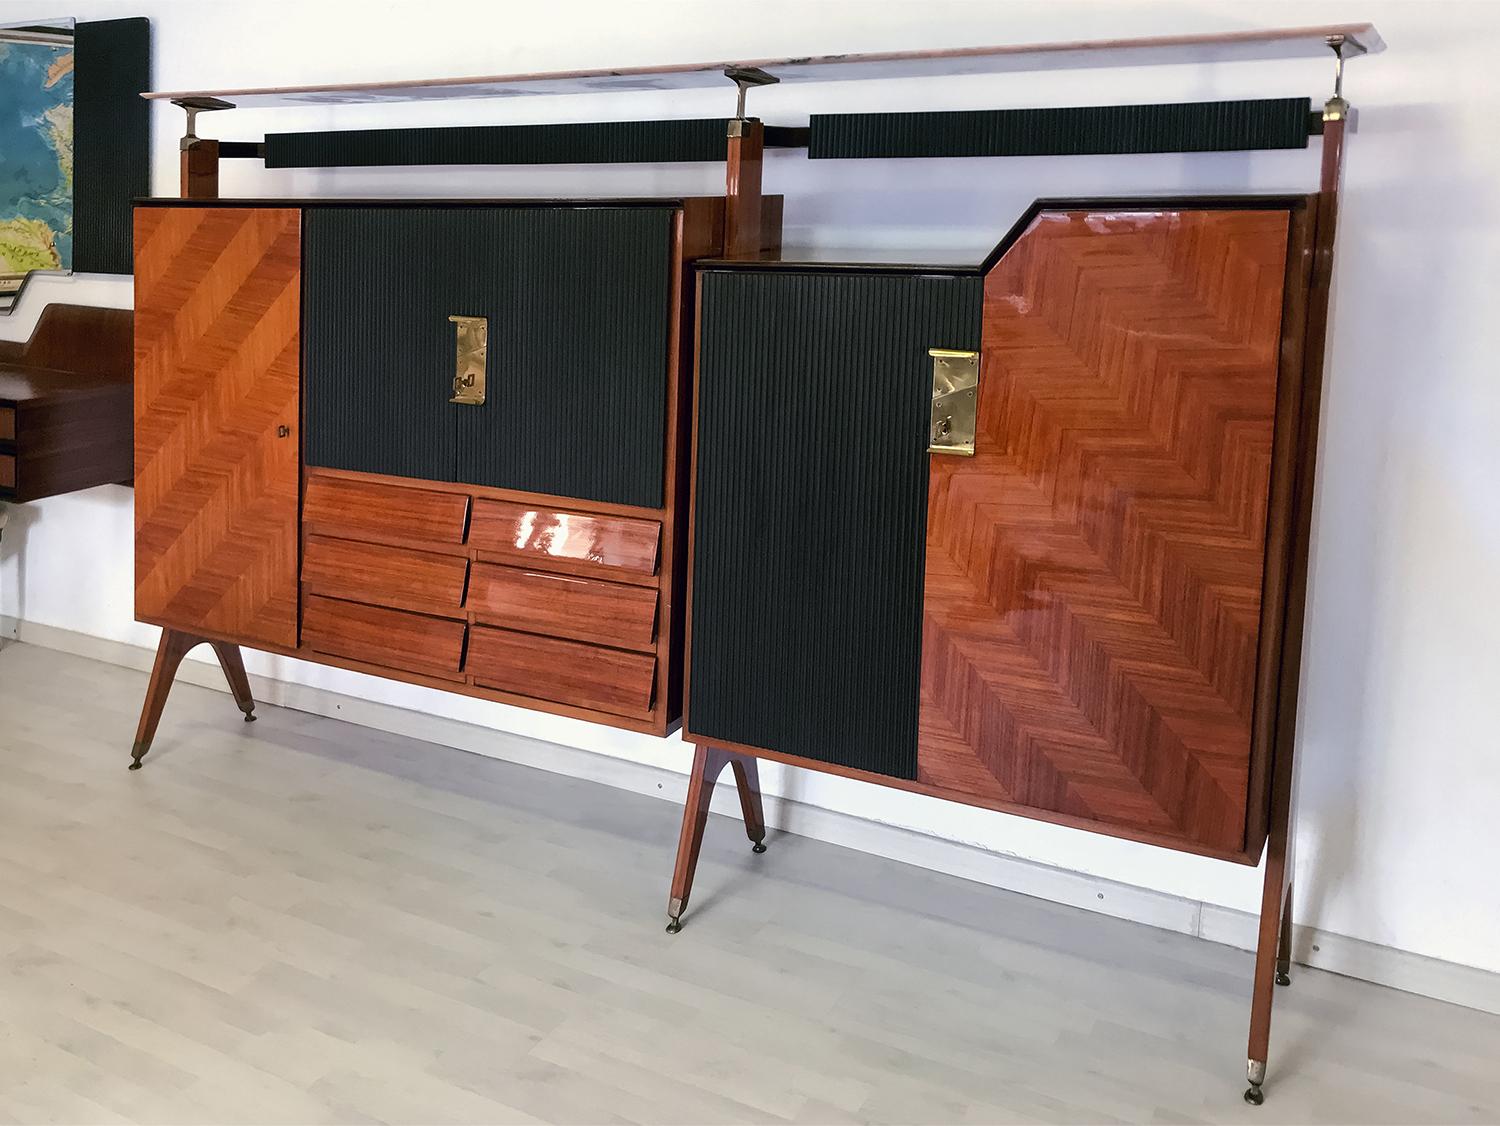 This stunning Italian sideboard is designed by La Permanente Mobili Cantù, and is an expressive piece of the midcentury italian design manufactured in the 1950s.

It’s uniqueness is given by the unusual sculptural shape design of the cabinets made